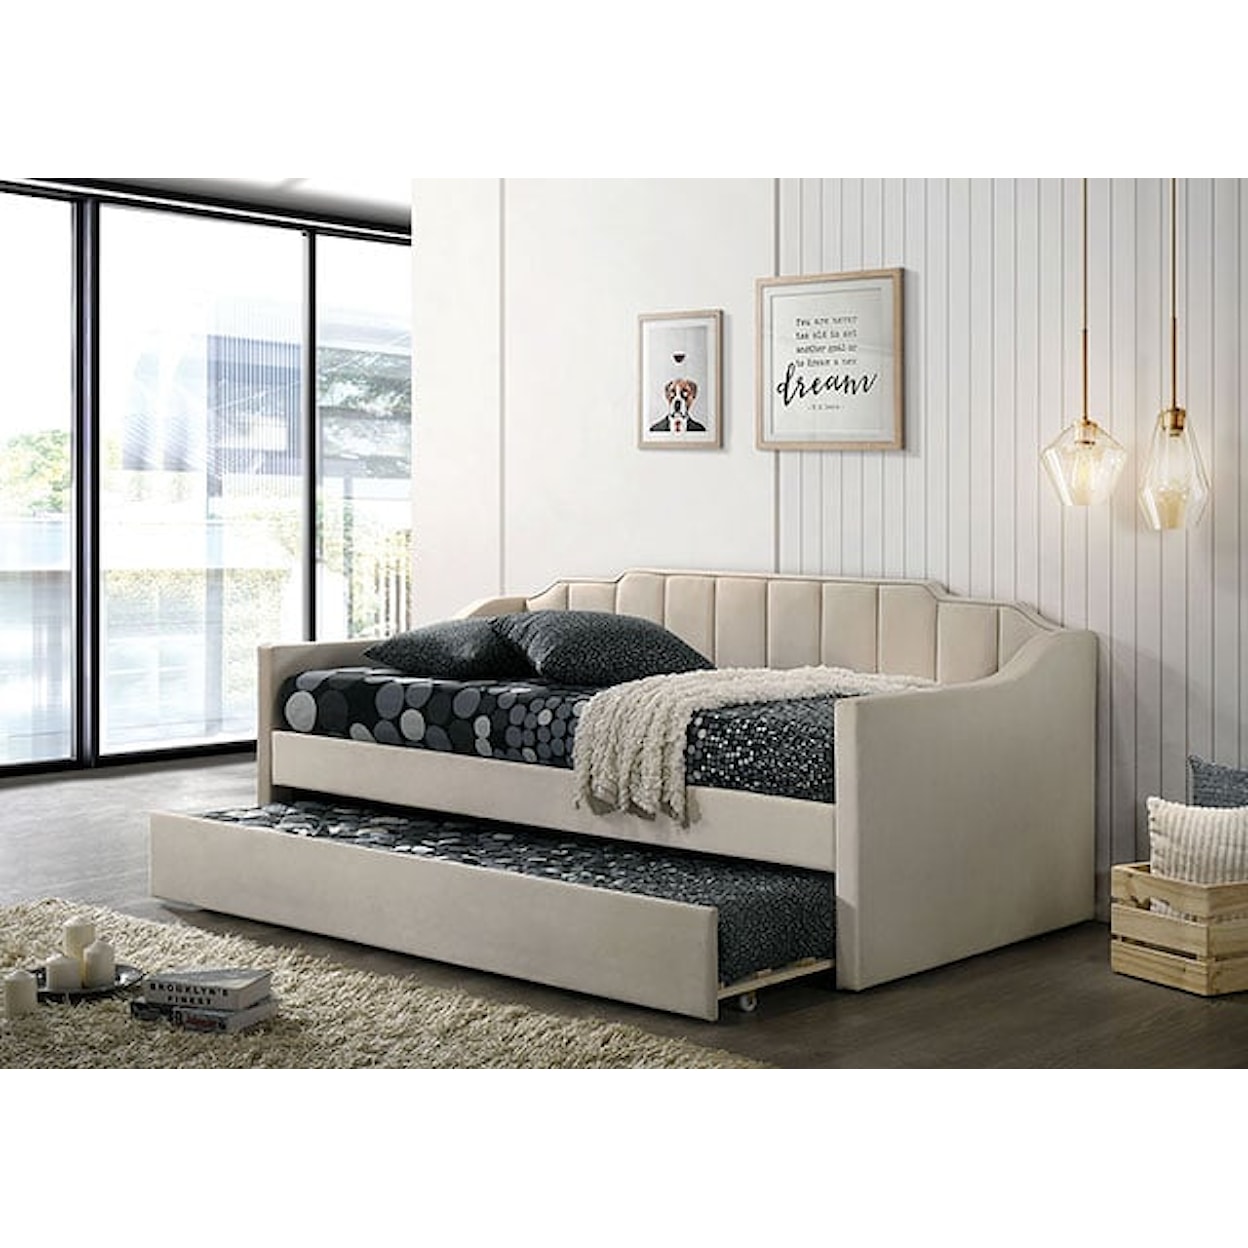 Furniture of America Kosmo Upholstered Daybed with Matching Trundle